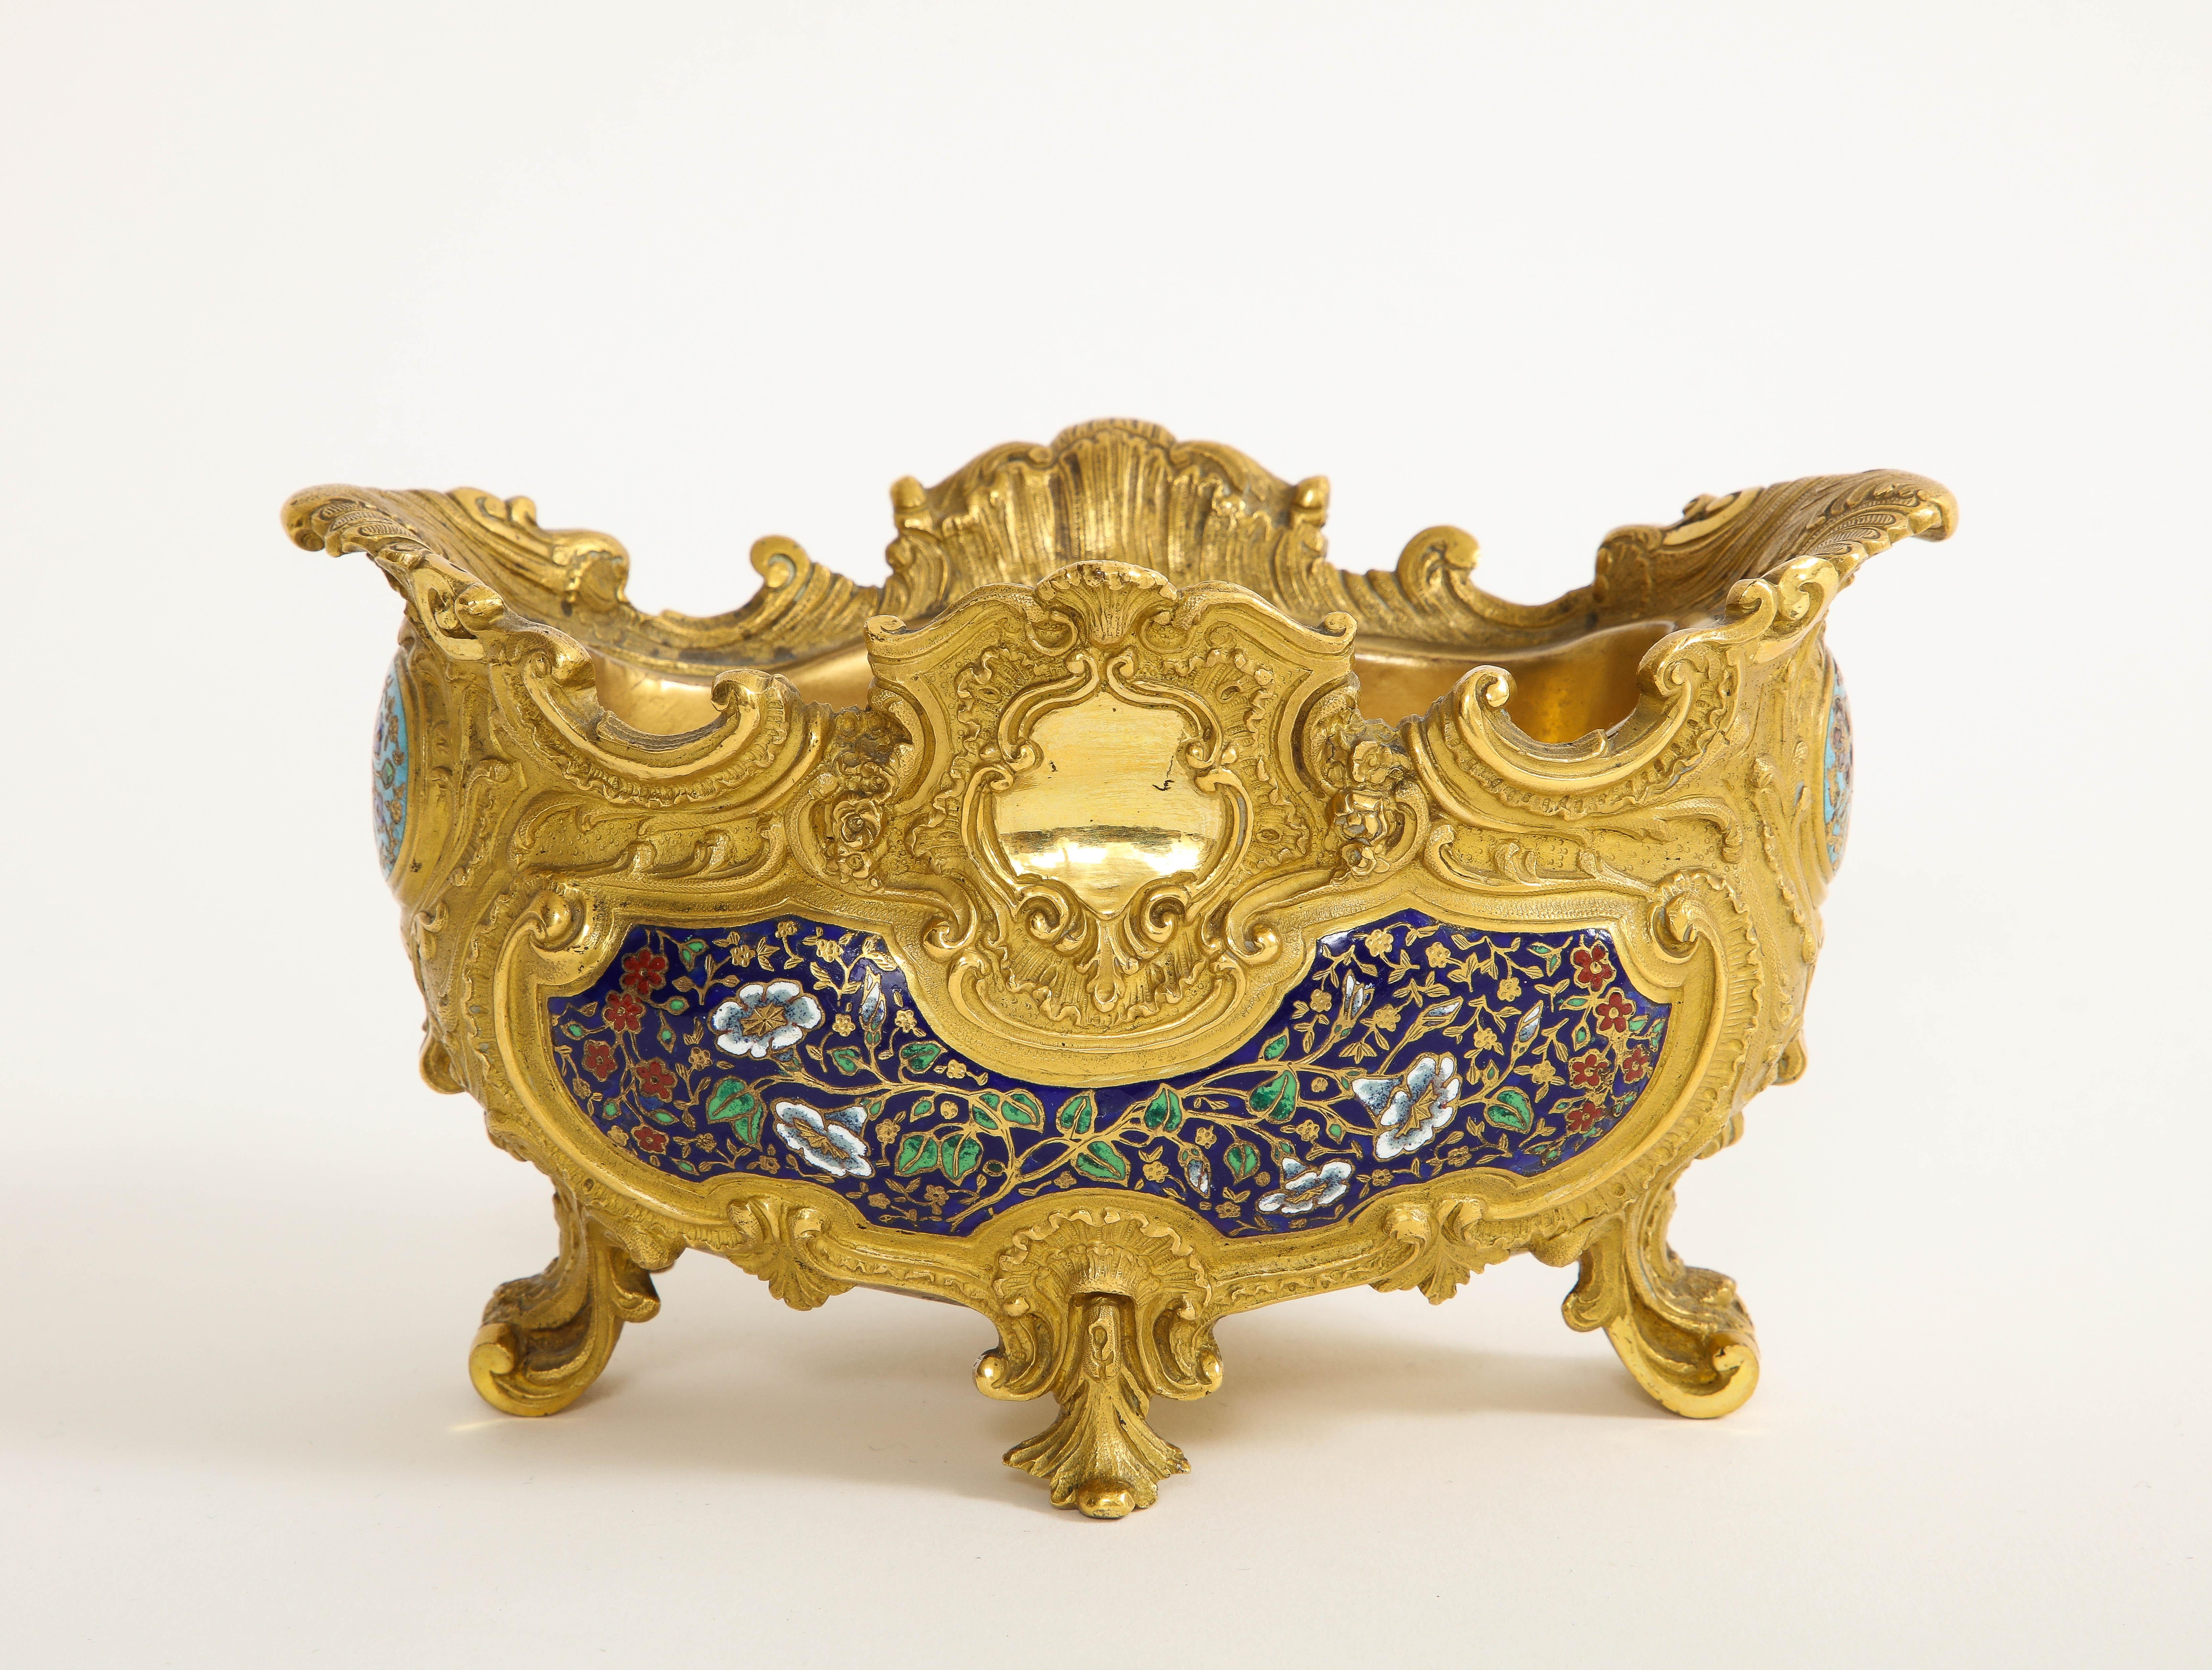 An Incredible 19th Century French Ormolu Champlevé Enamel Footed Centerpiece, Att. Barbedienne.  This captivating piece stands as a testament to the impeccable craftsmanship of its era. Elevated on resplendent acanthus scrolled feet, this enameled